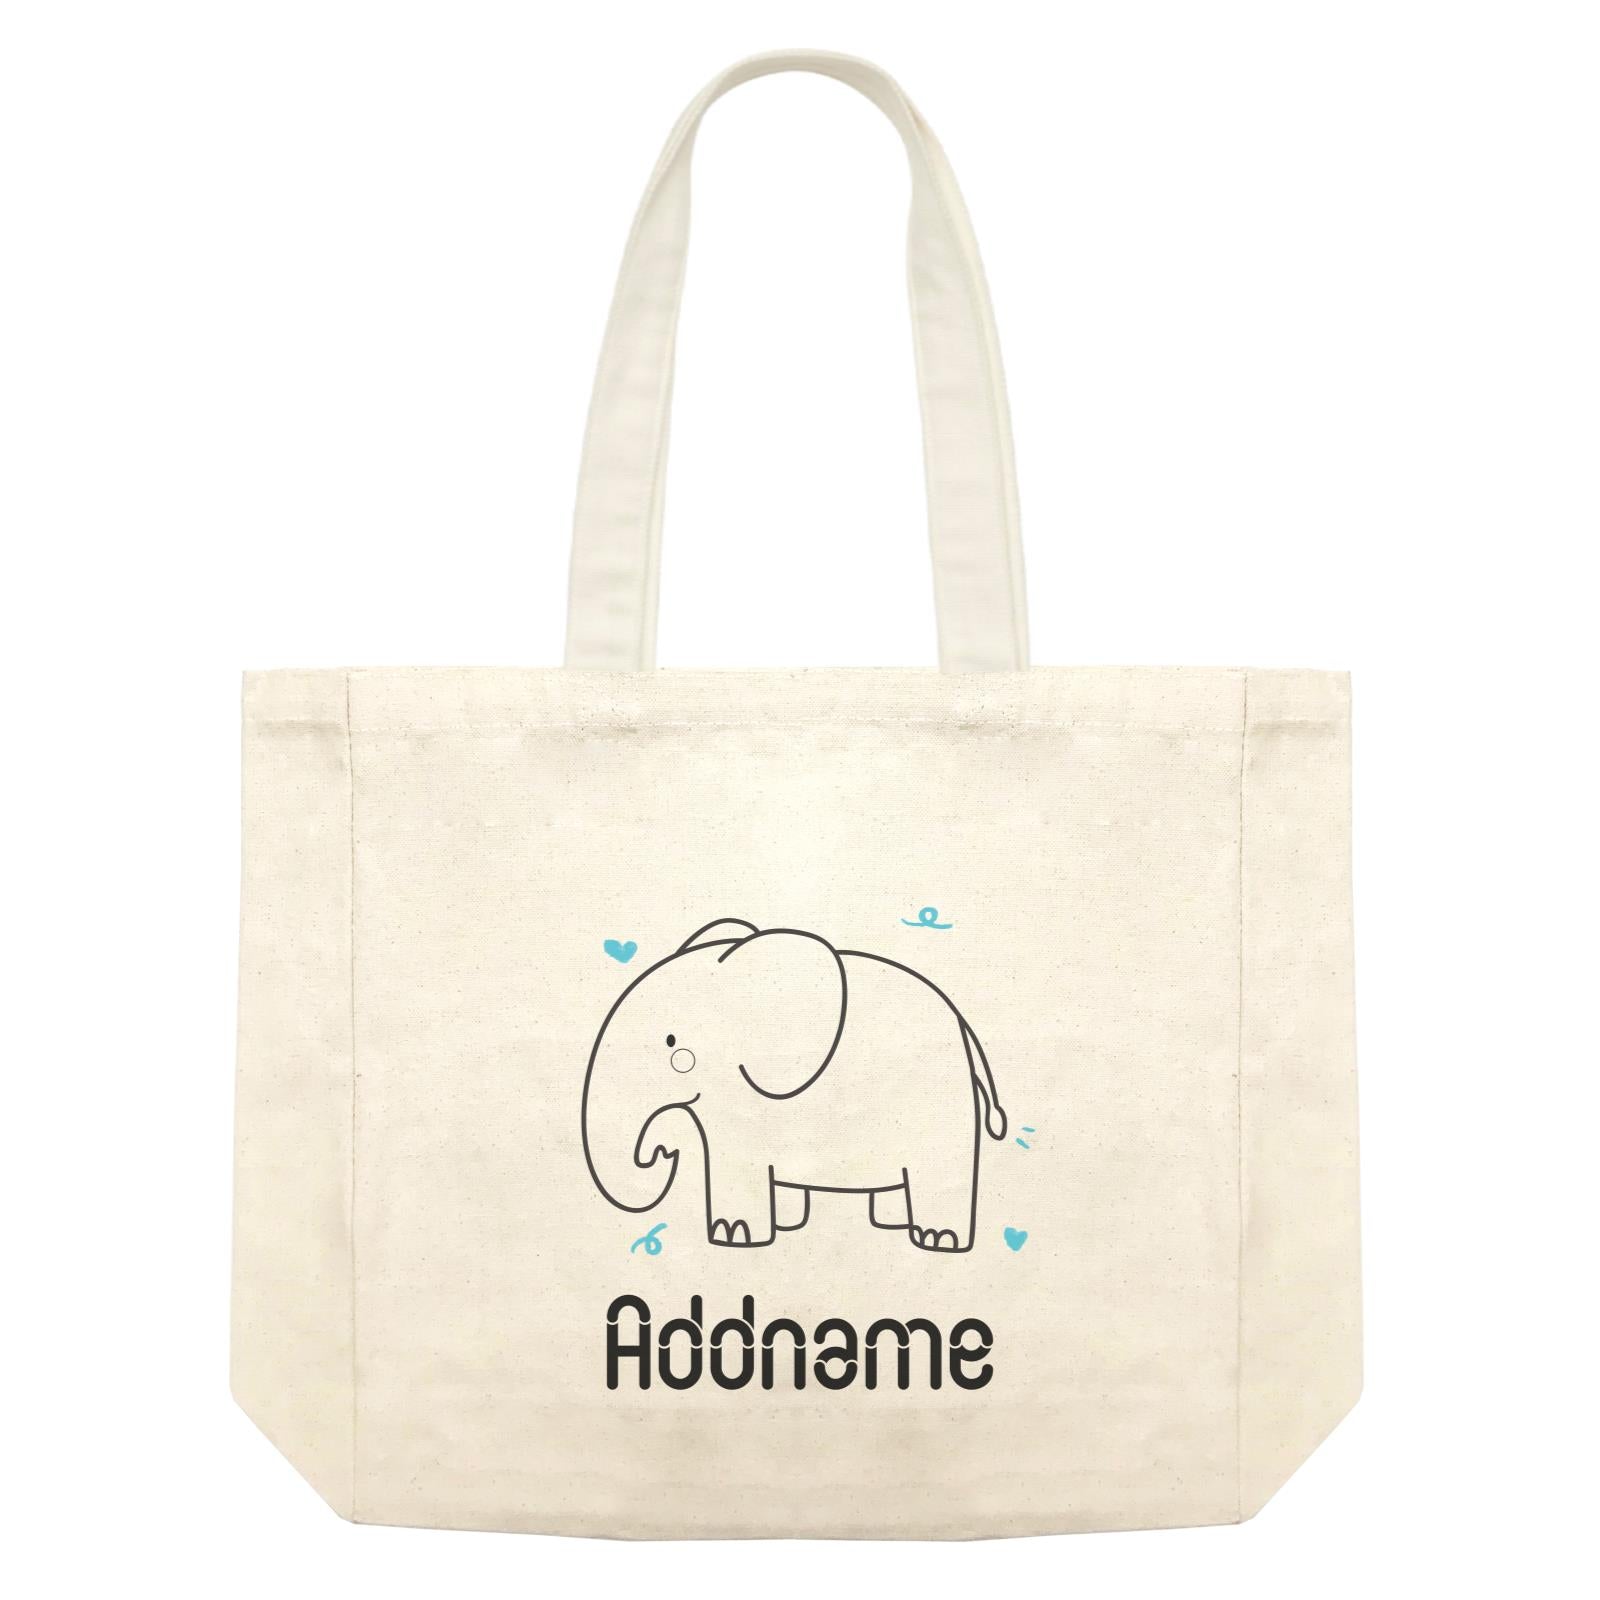 Coloring Outline Cute Hand Drawn Animals Elephants Blue Elephants Addname Shopping Bag